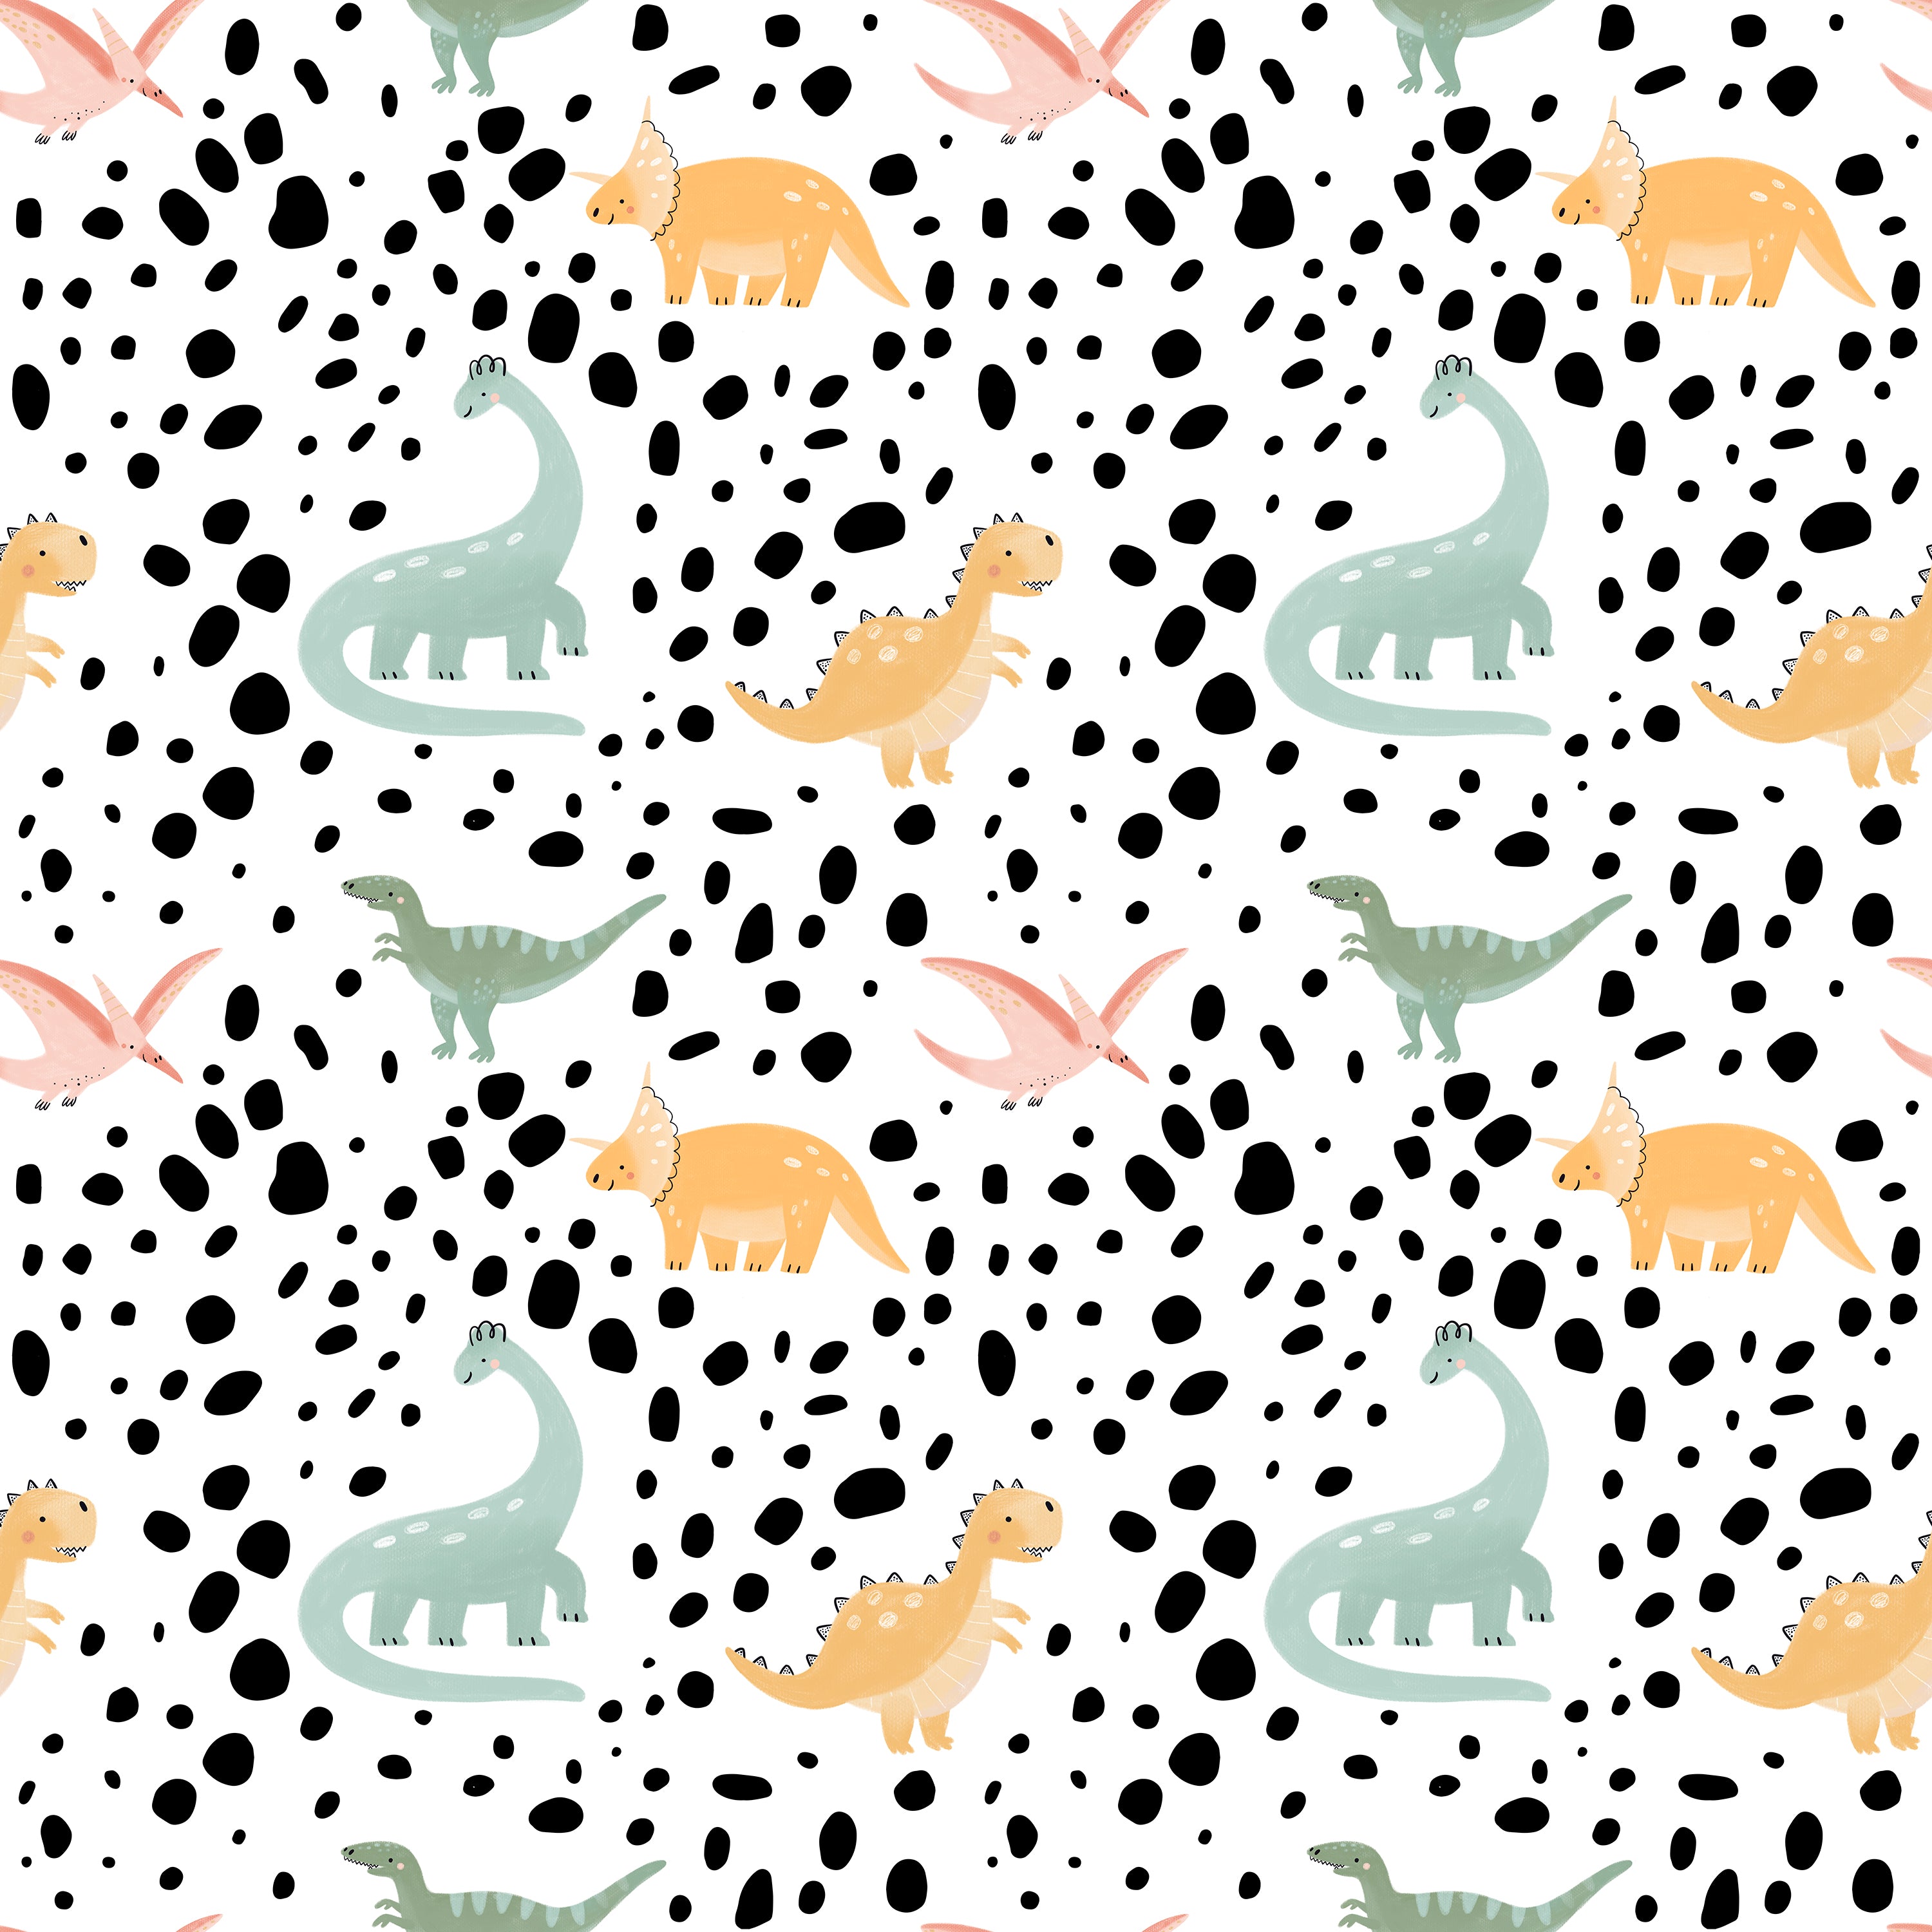 Pattern of assorted pastel-colored dinosaurs and black speckles on a white background. Dinosaurs include triceratops, brachiosaurus, and pterodactyl, depicted in soft tones of green, yellow, and pink.